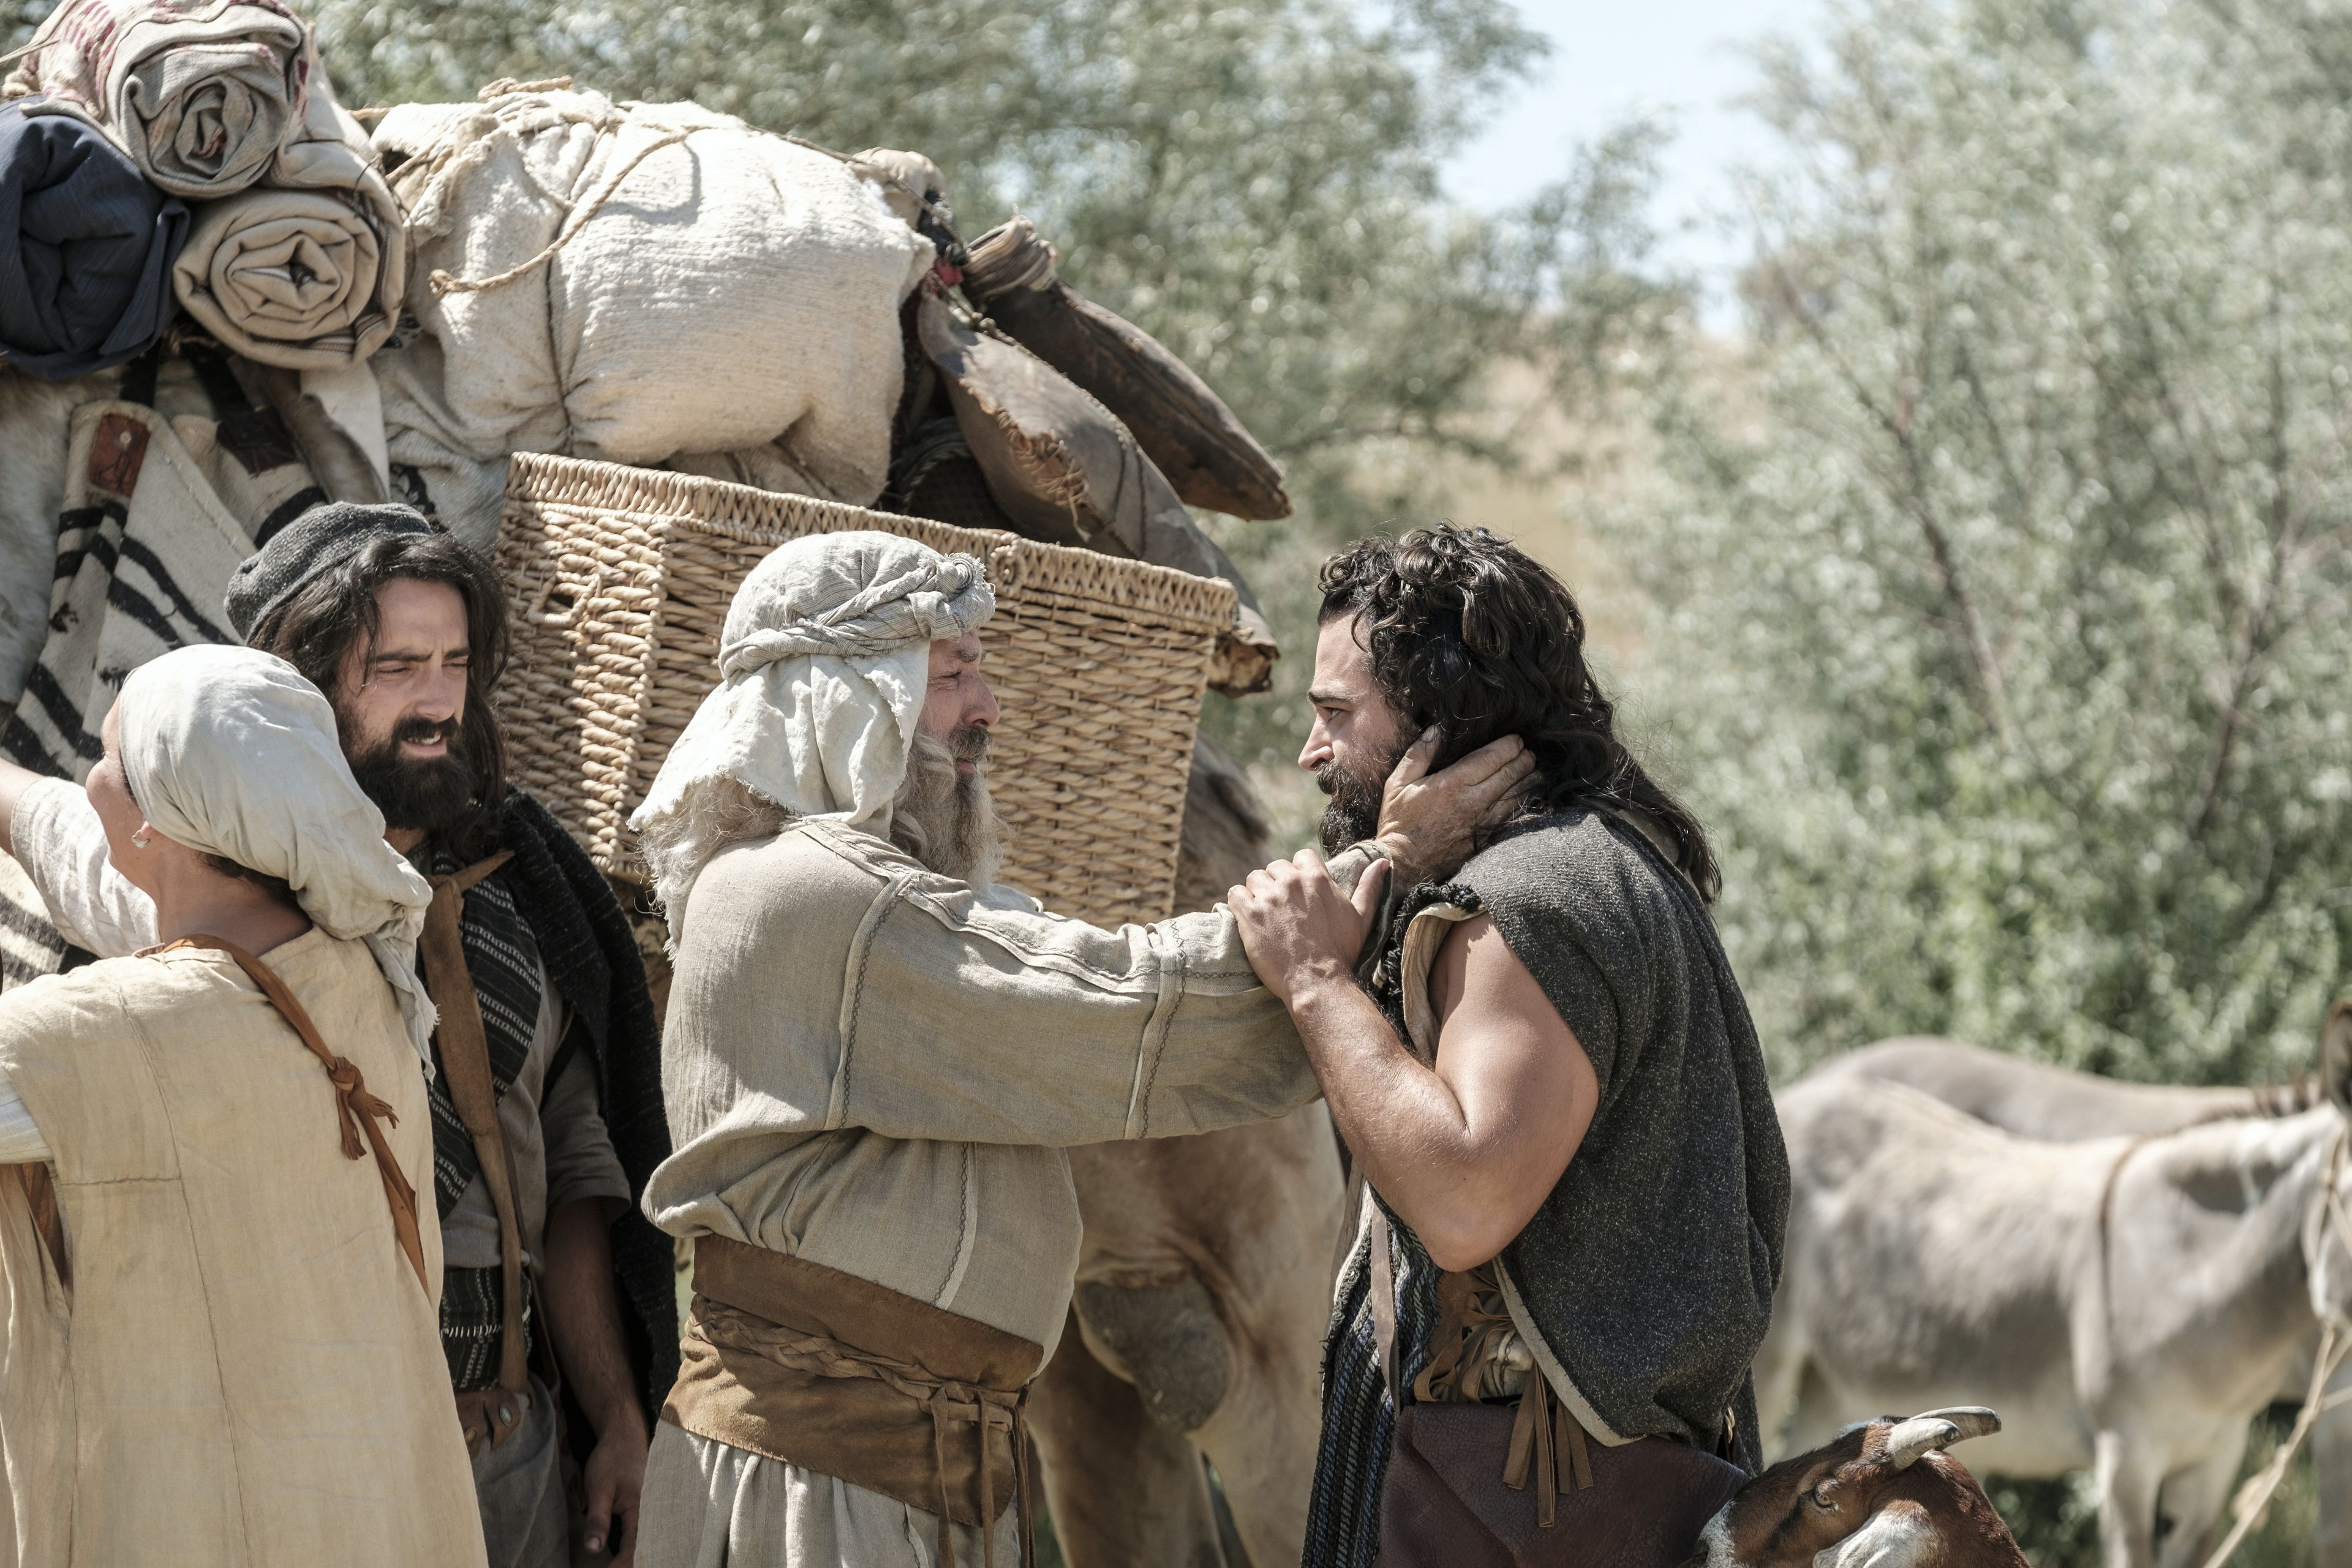 Lehi bids Laman and his brothers farewell before their return to Jerusalem.